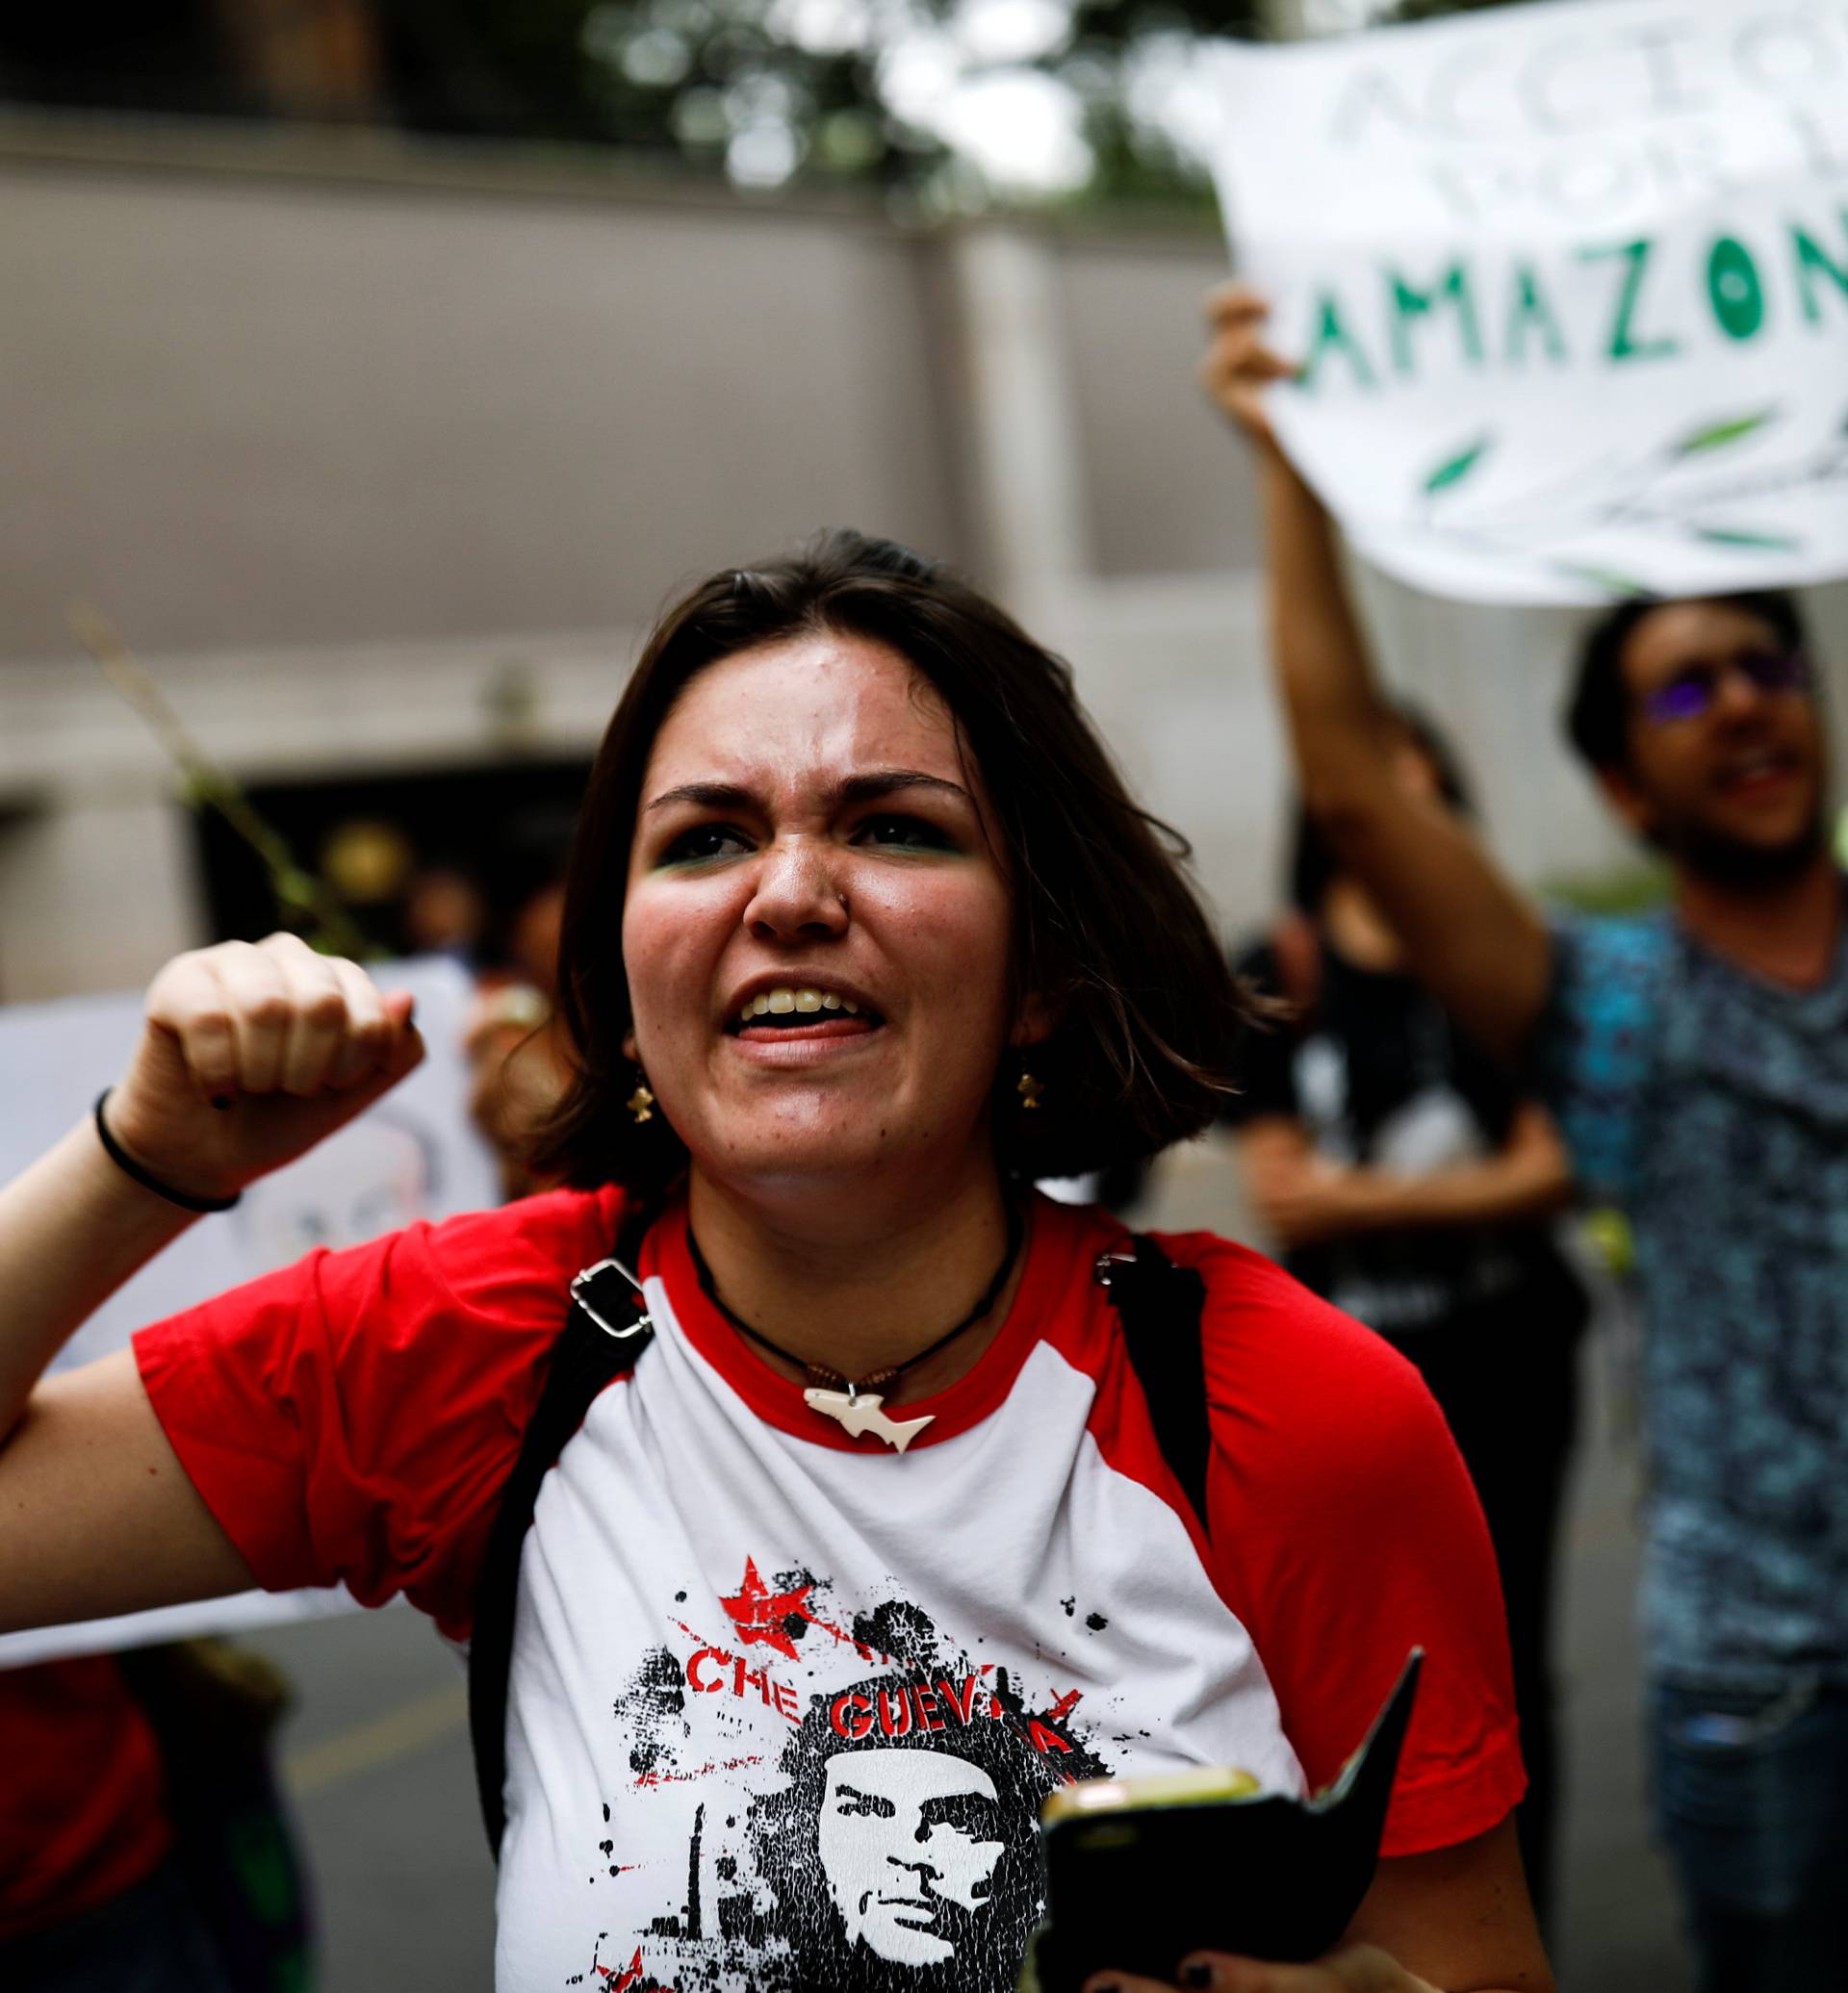 People attend a demonstration to demand more protection for the Amazon rainforest, at the Brazilian embassy in Mexico City